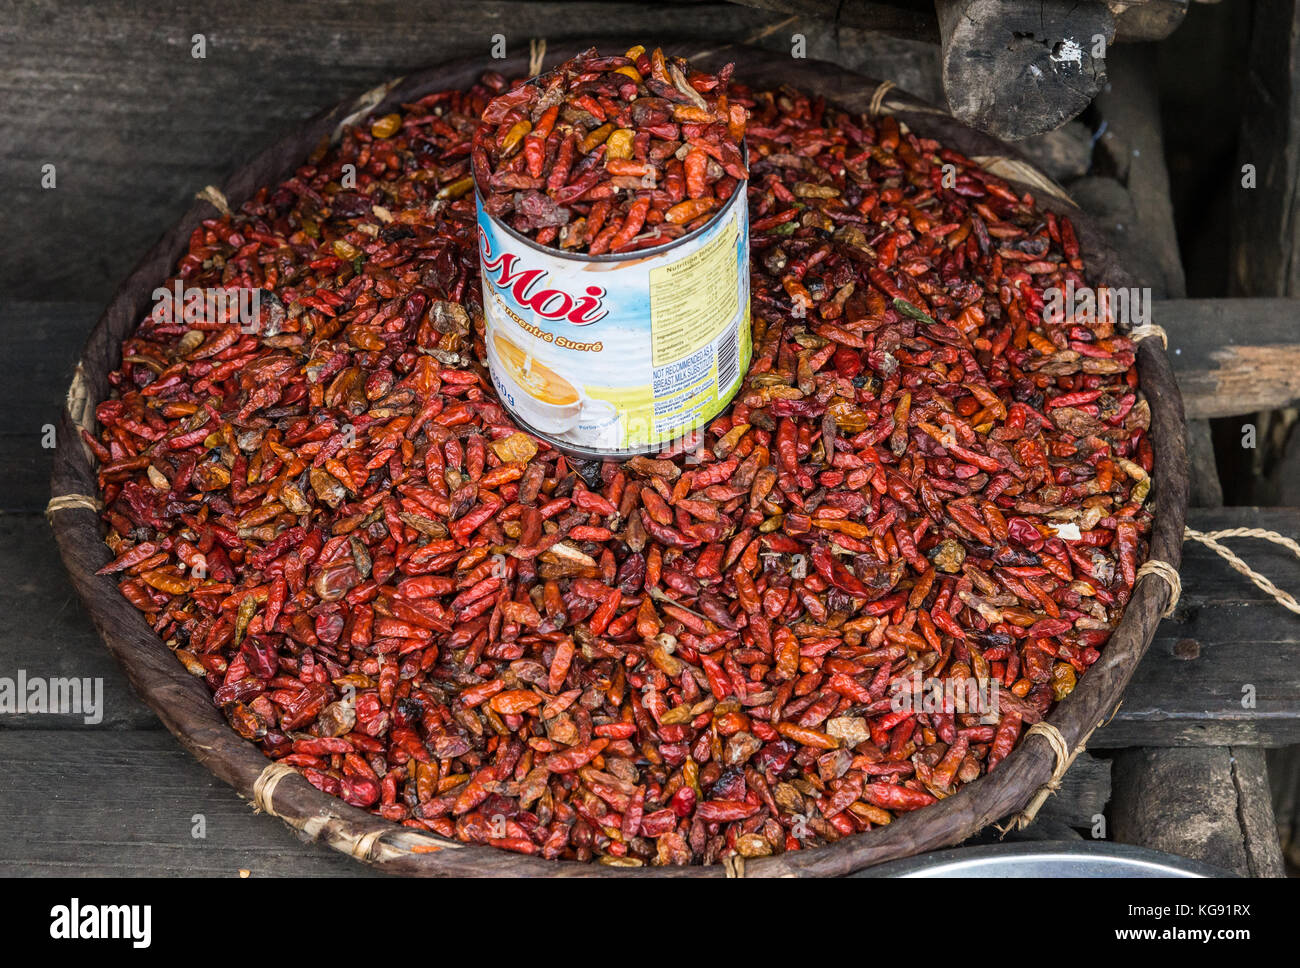 Dried red chili peppers for sale at a local market. Madagascar, Africa. Stock Photo